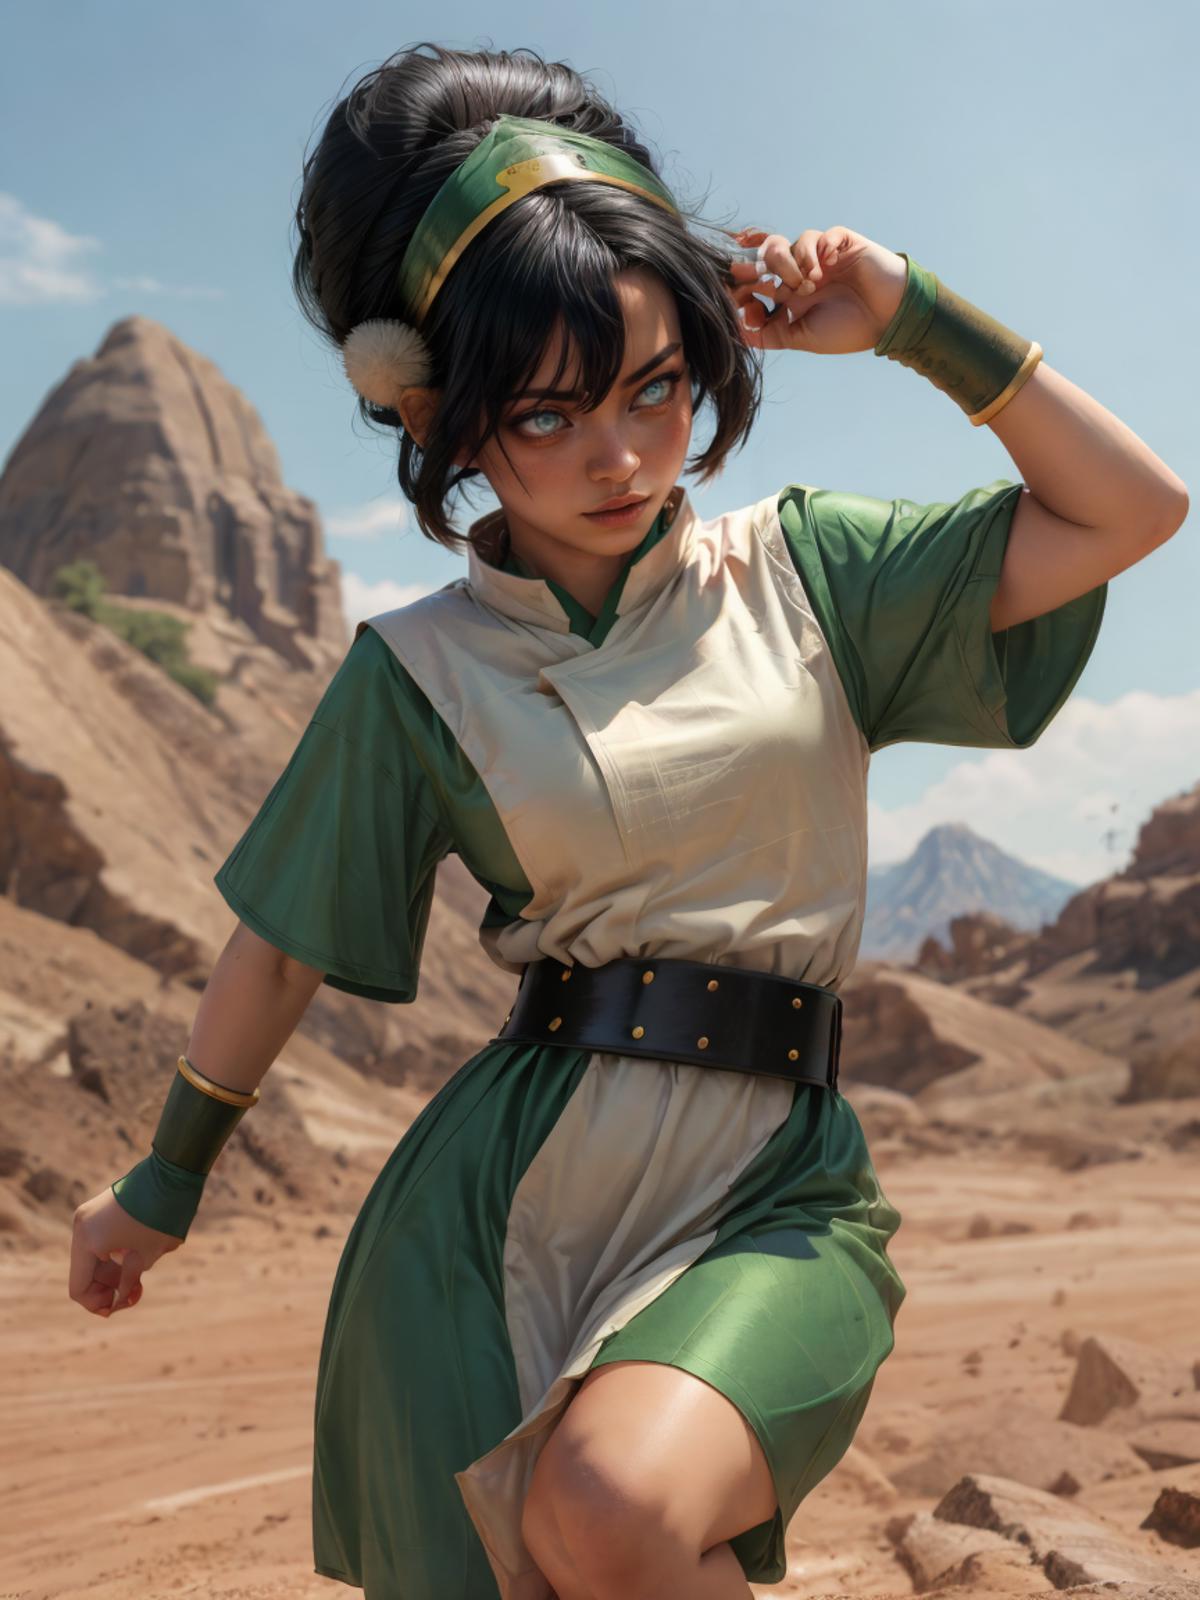 An anime-styled girl with a green dress, standing on a rocky landscape.